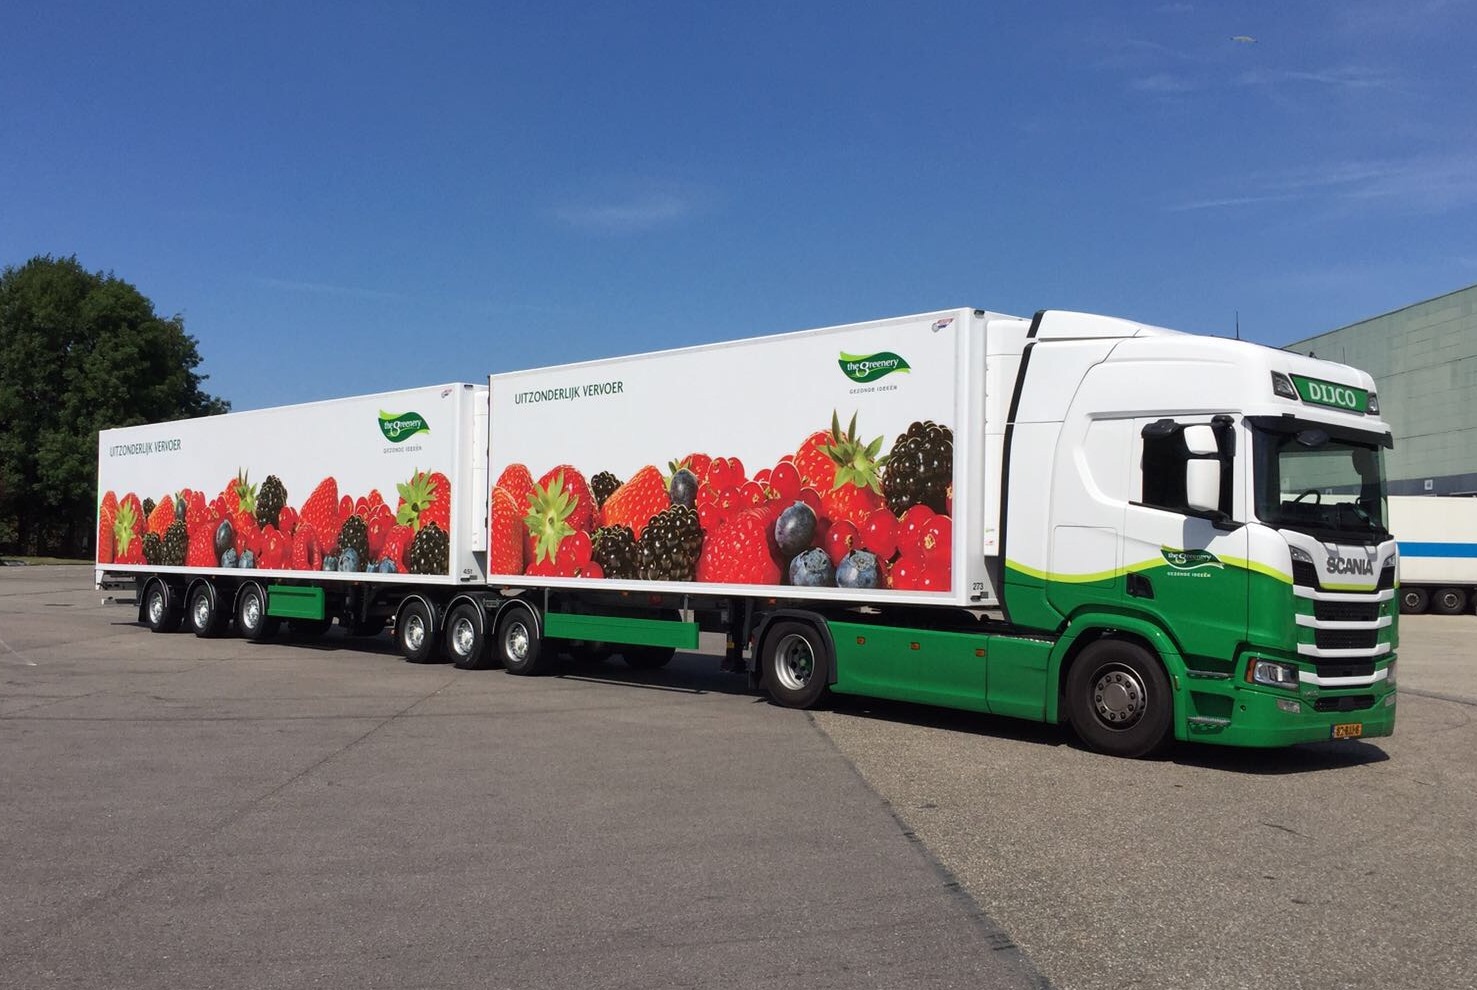 25 Pacton reefer trailers delivered to Dijco